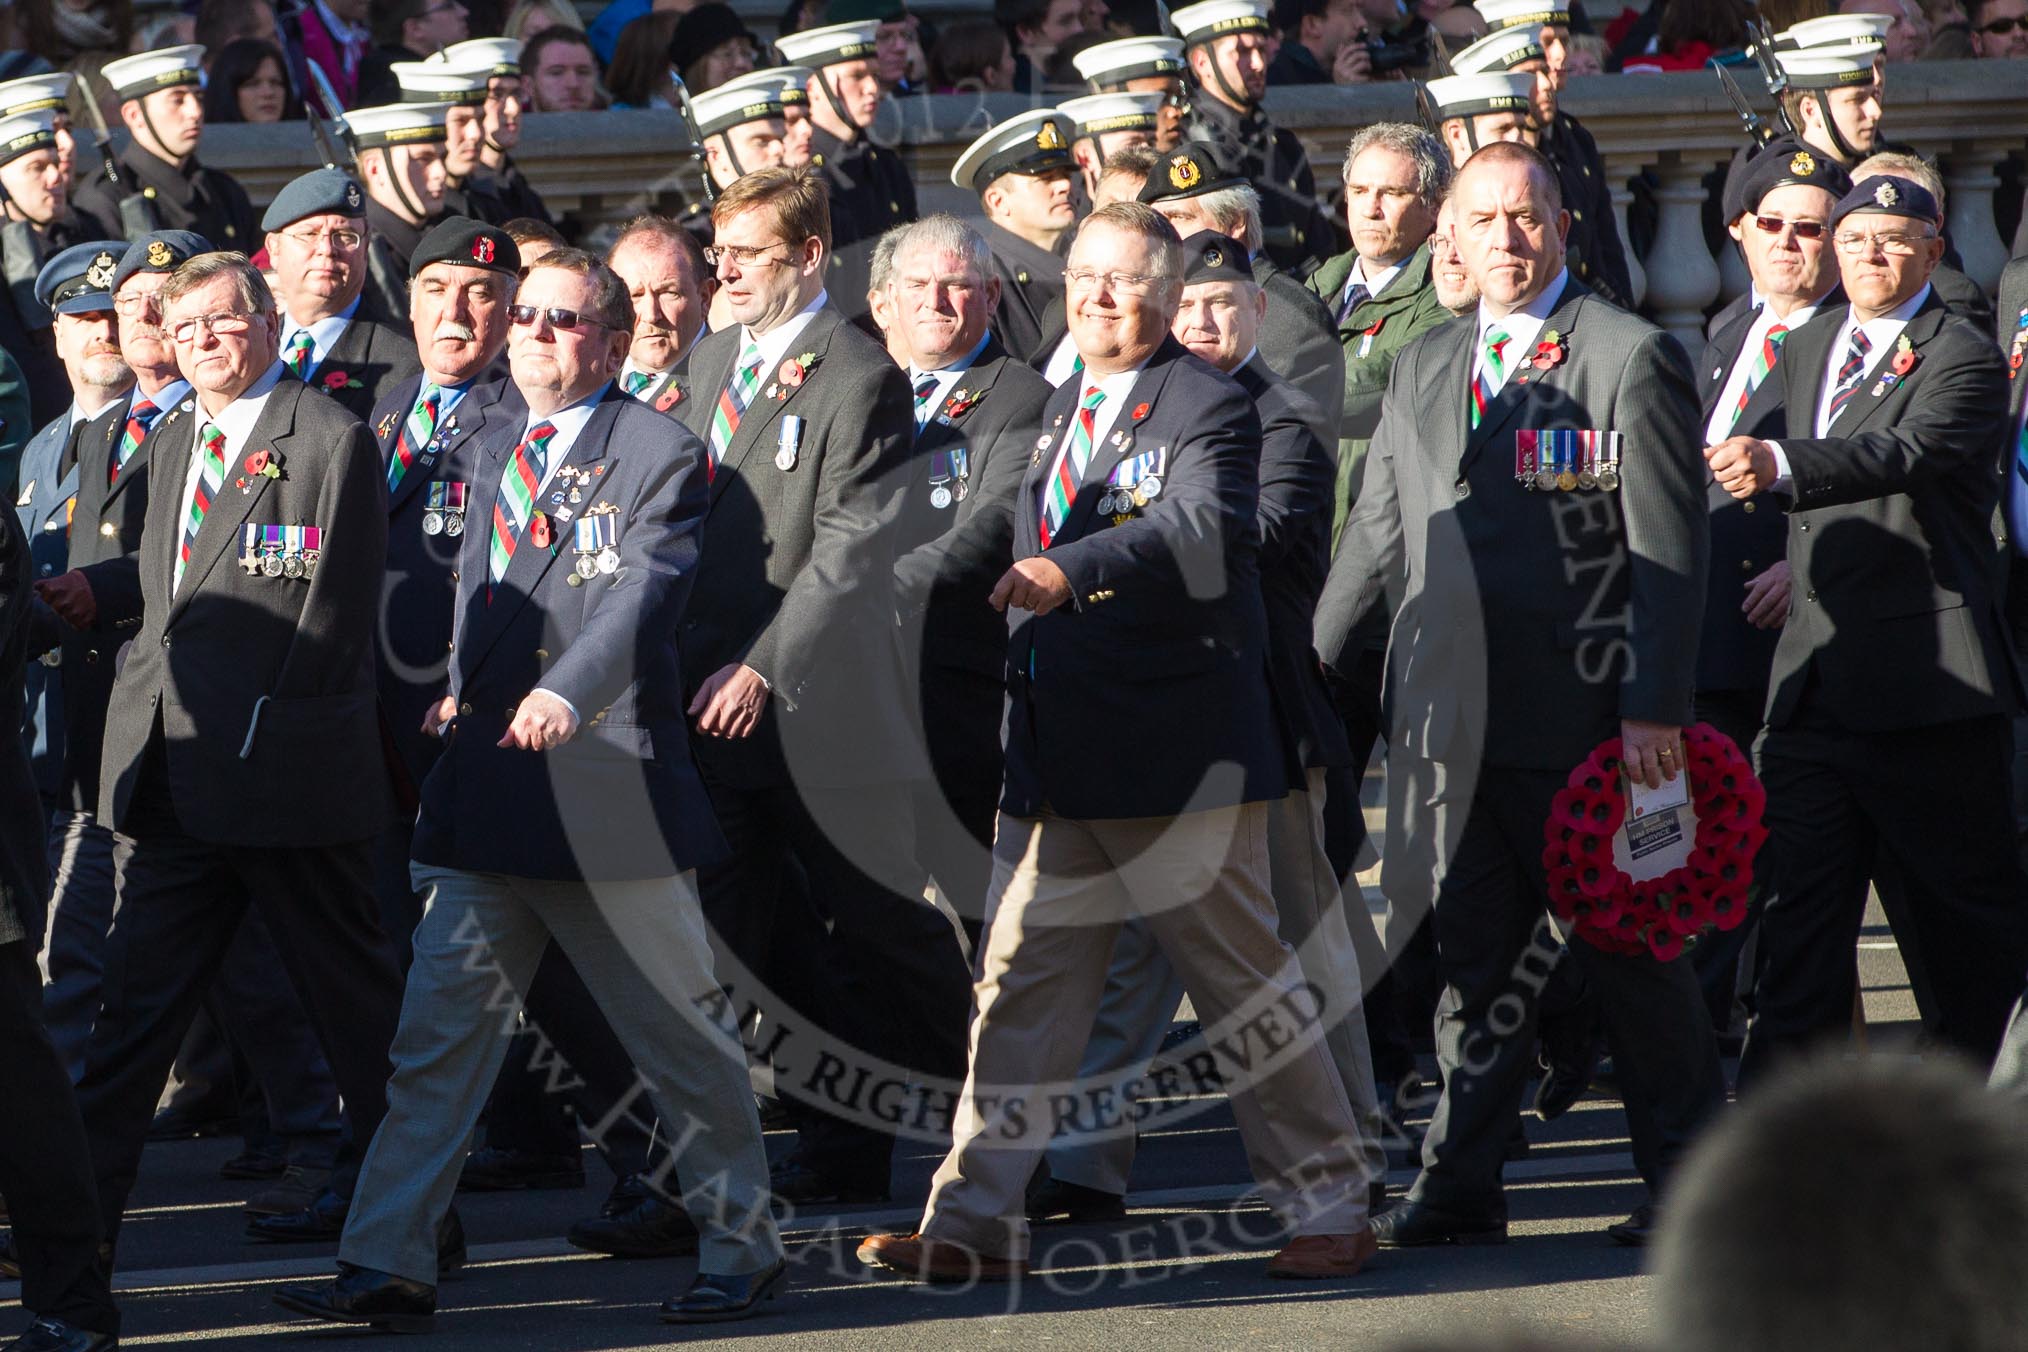 Remembrance Sunday 2012 Cenotaph March Past: Group D1 - South Atlantic Medal Association..
Whitehall, Cenotaph,
London SW1,

United Kingdom,
on 11 November 2012 at 12:04, image #1208